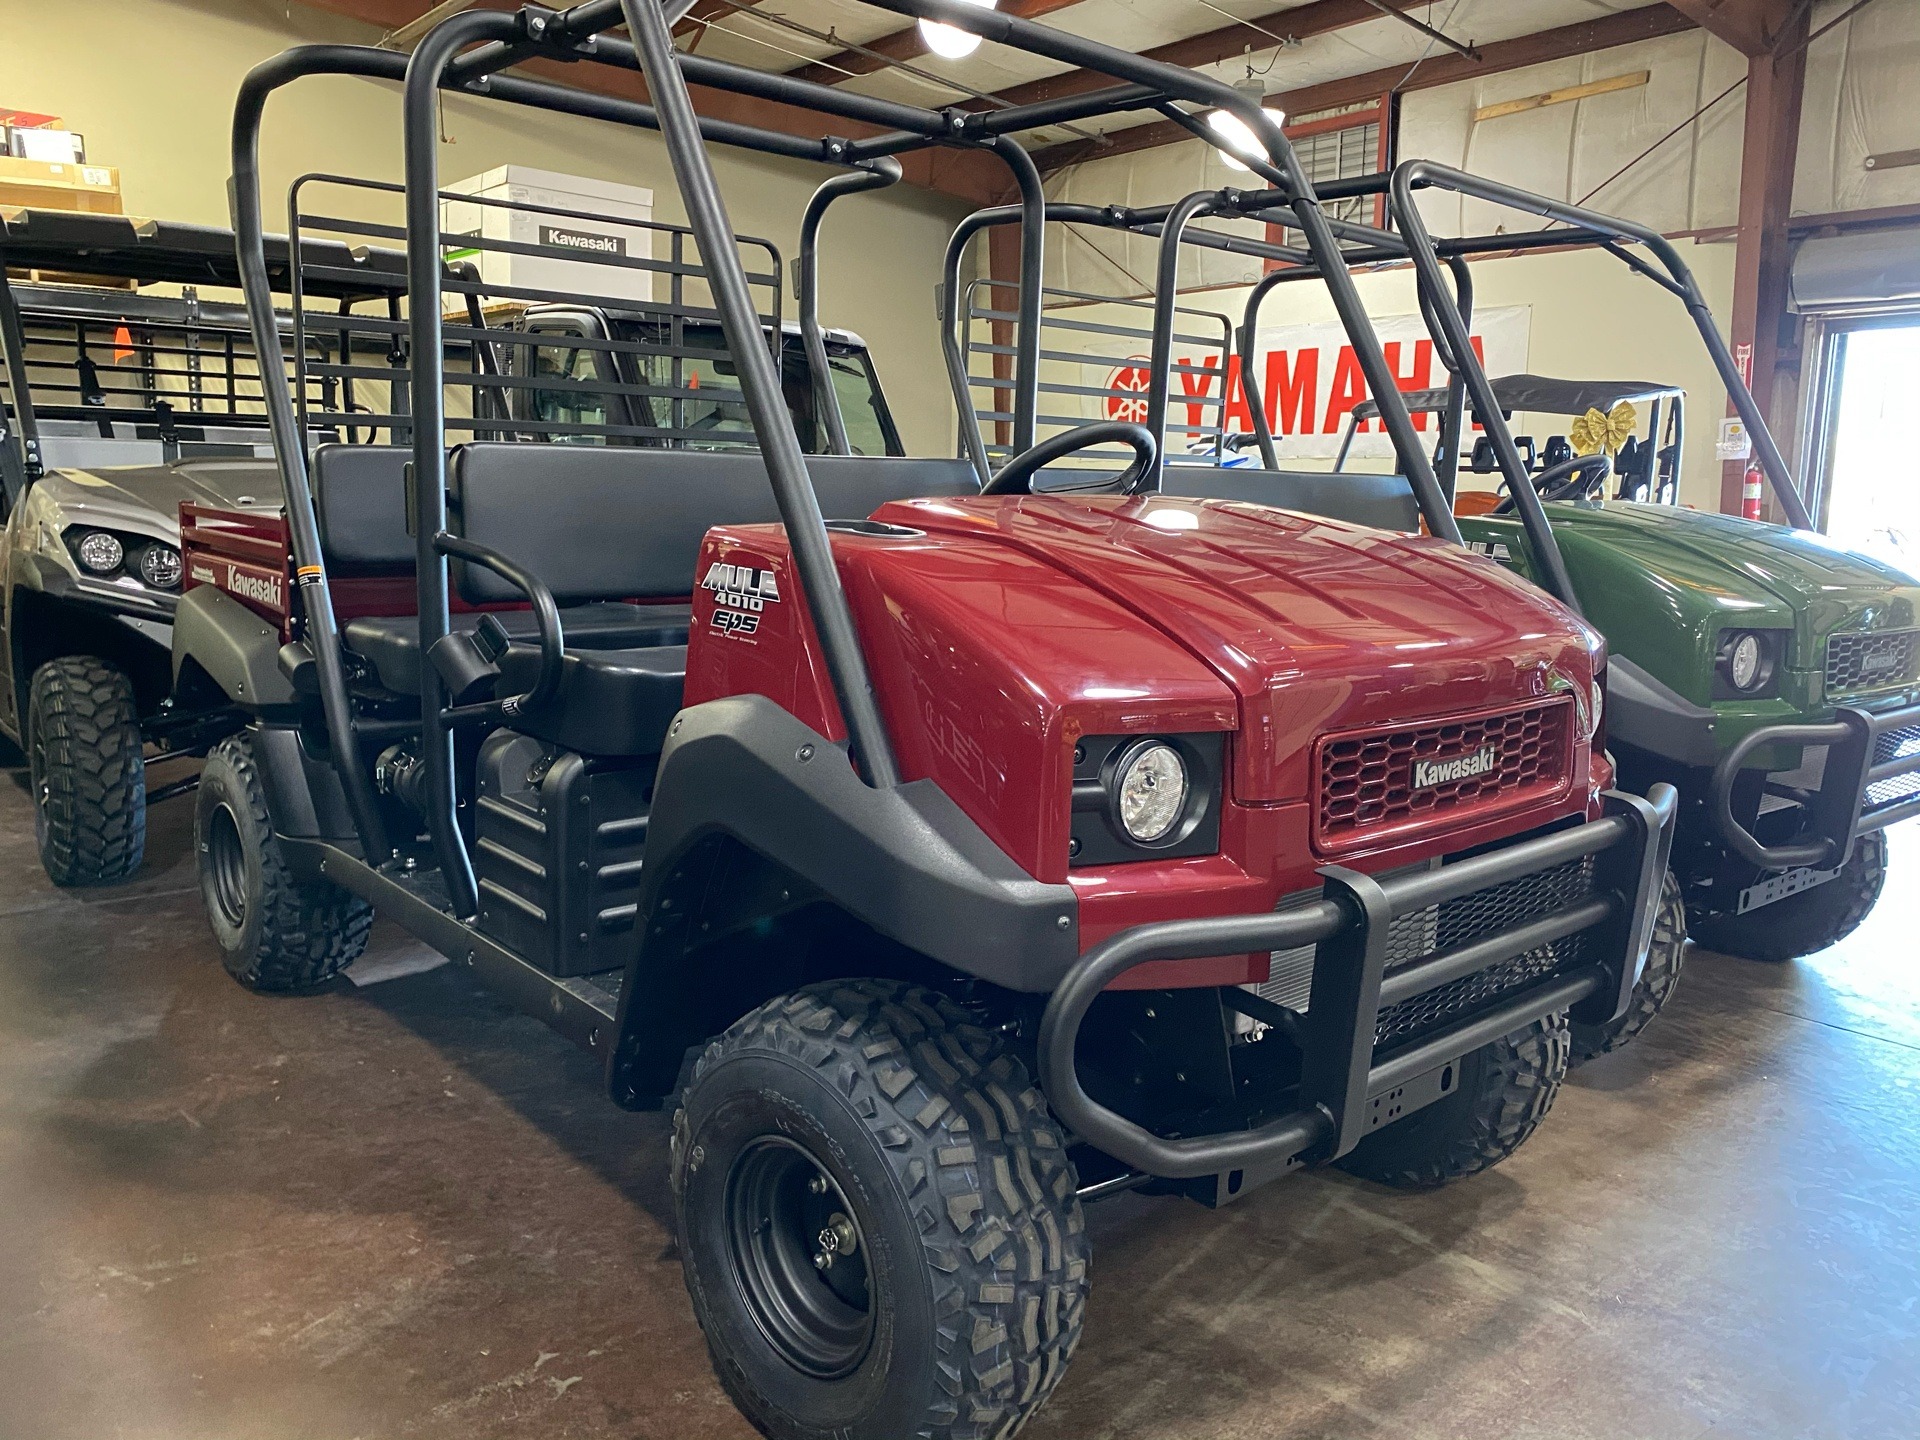 New 2021 Kawasaki Mule 4010 Trans4x4 Utility Vehicles in Statesville, NC | Number: 541434 - greatwesternmotorcycles.com